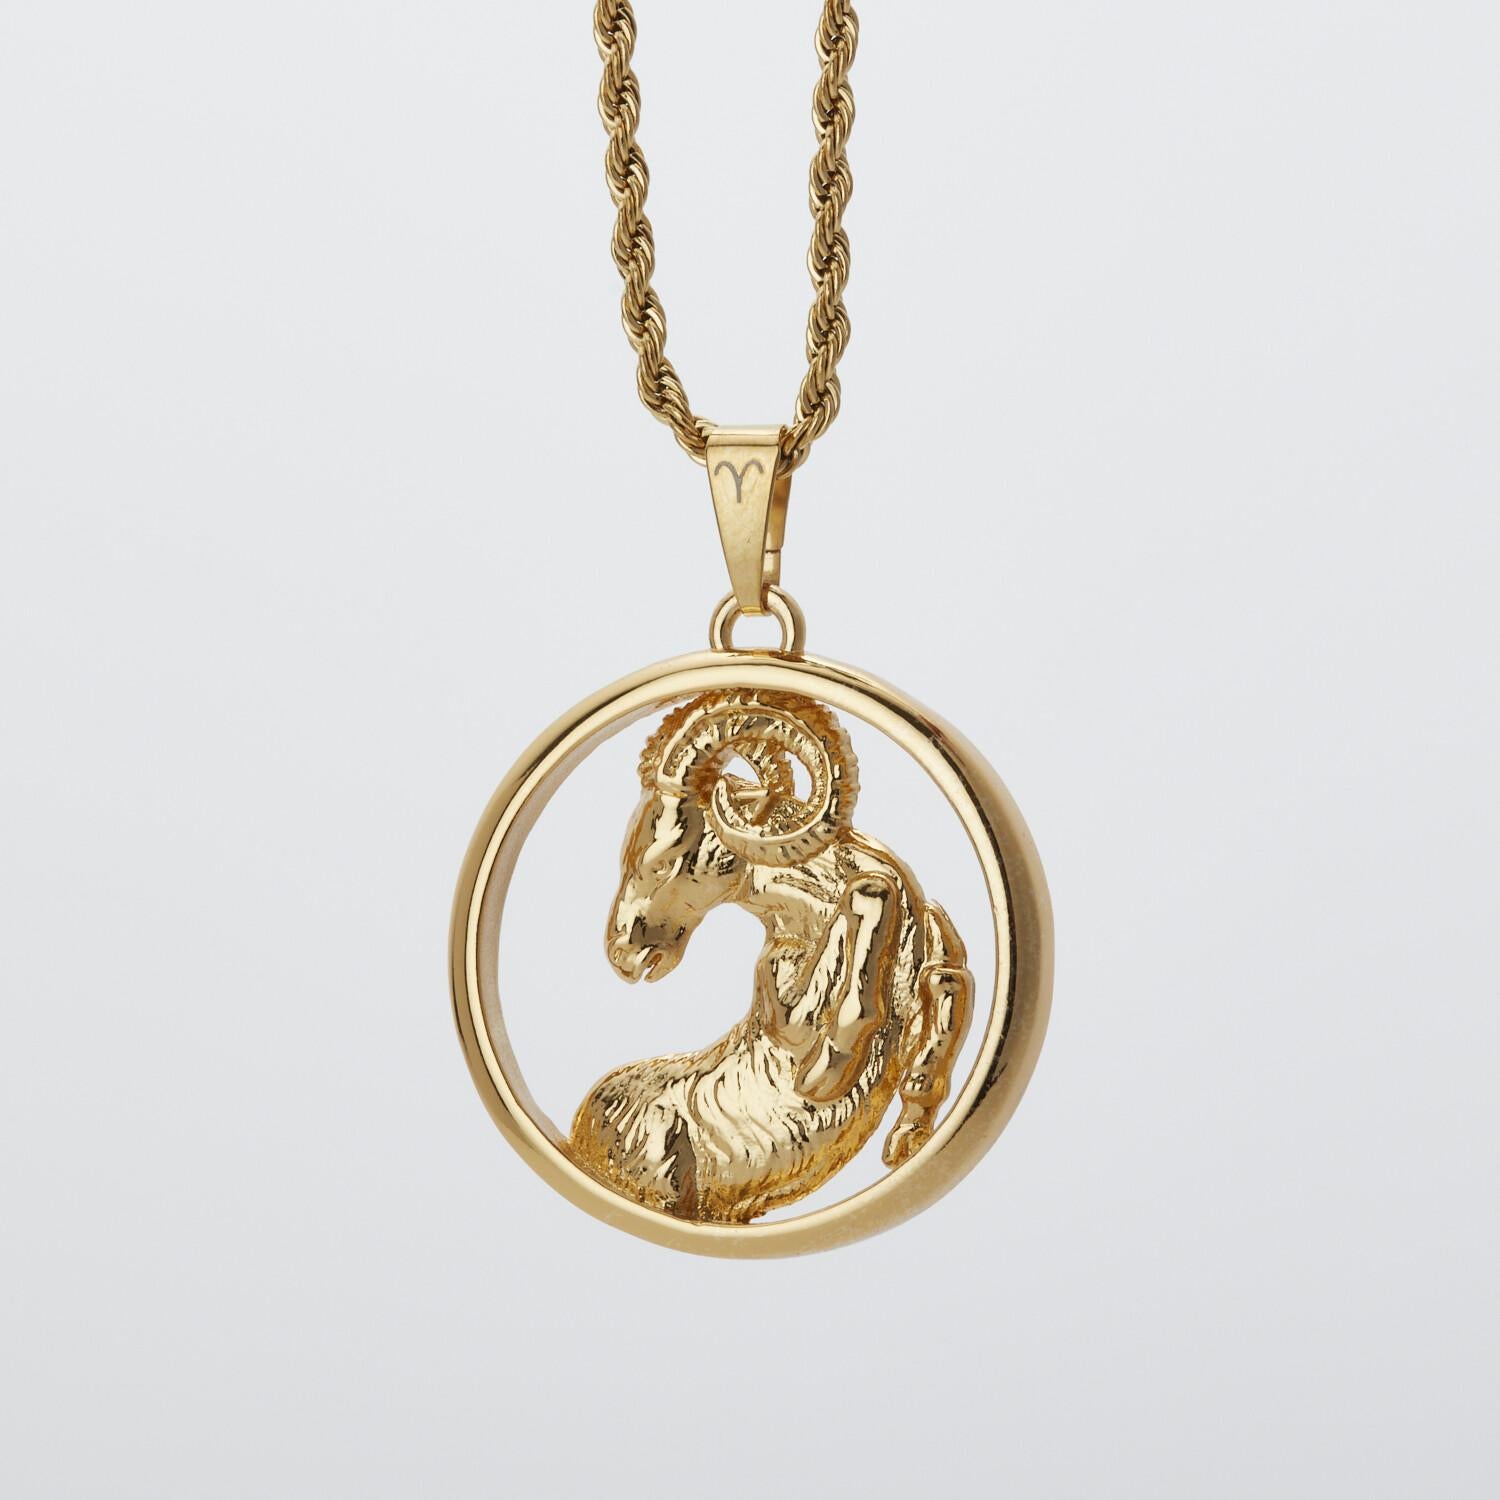 Eternally Aries (March 21-April 19)

The Eternal Zodiac “Aries” Pendant features the symbol of the ram. Aries is a fire sign and ruled by the planet Mars. A lot like the ram, Aries are known for being bold and passionate individuals who are fearless